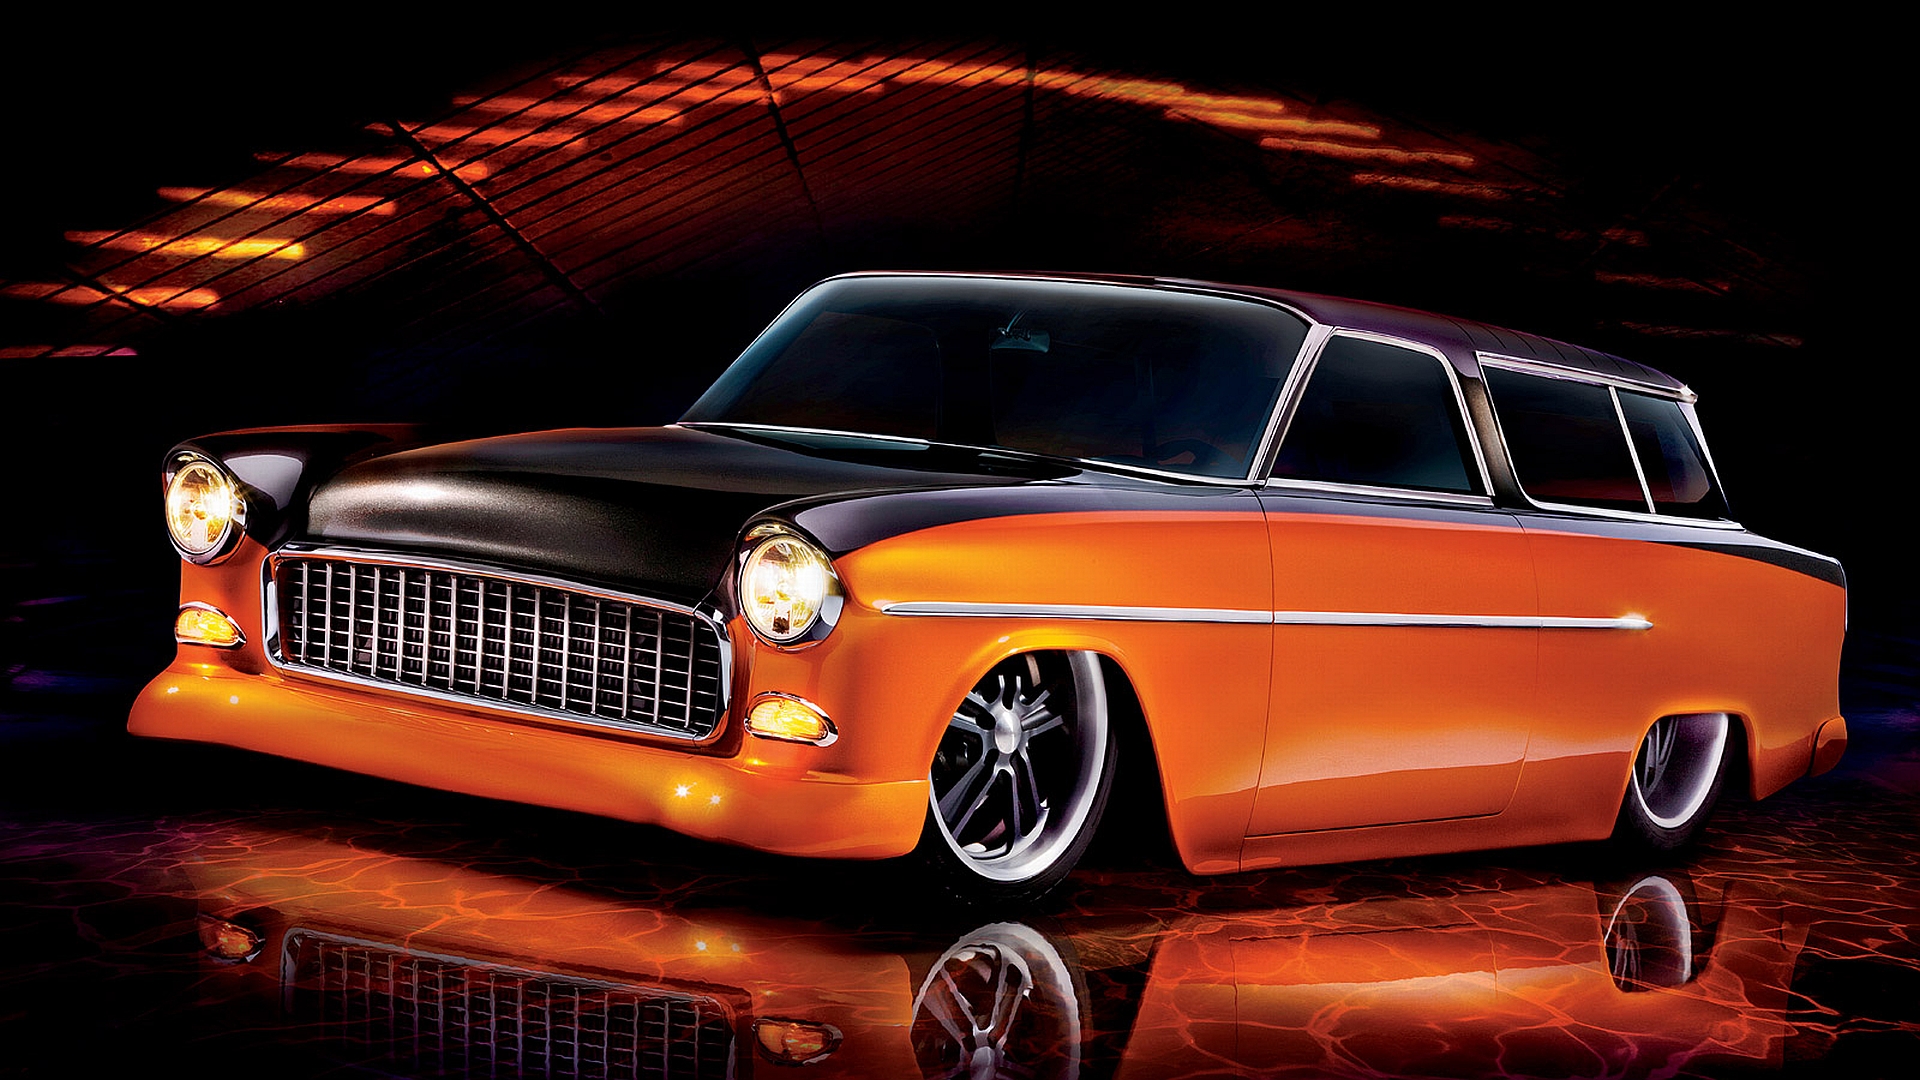 Chevrolet HD Wallpaper | Background Image | 1920x1080 | ID:173731